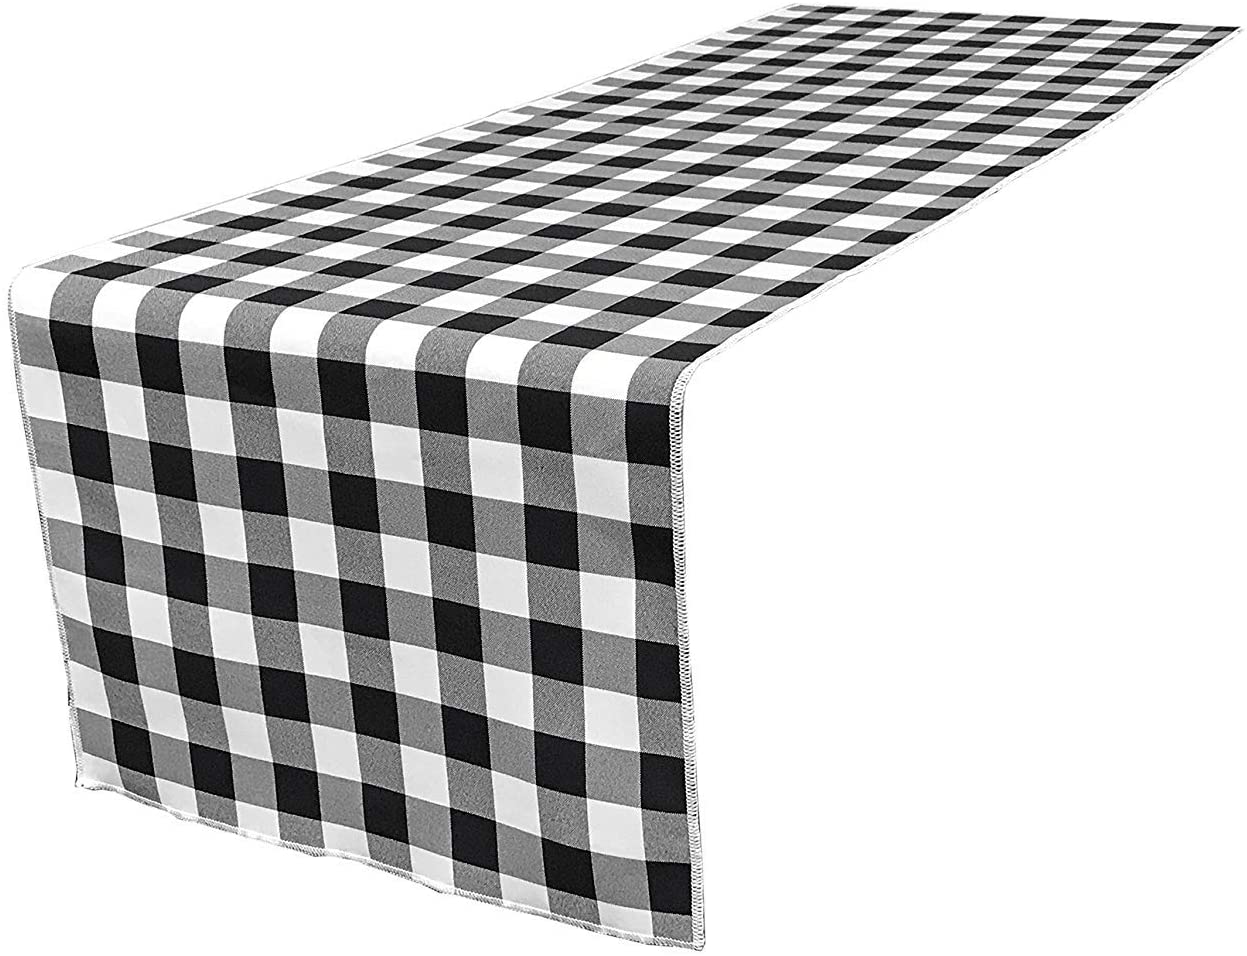 12" Wide by The Size of Your Choice, Polyester Poplin Gingham, Checkered, Plaid Table Runner (White & Black,